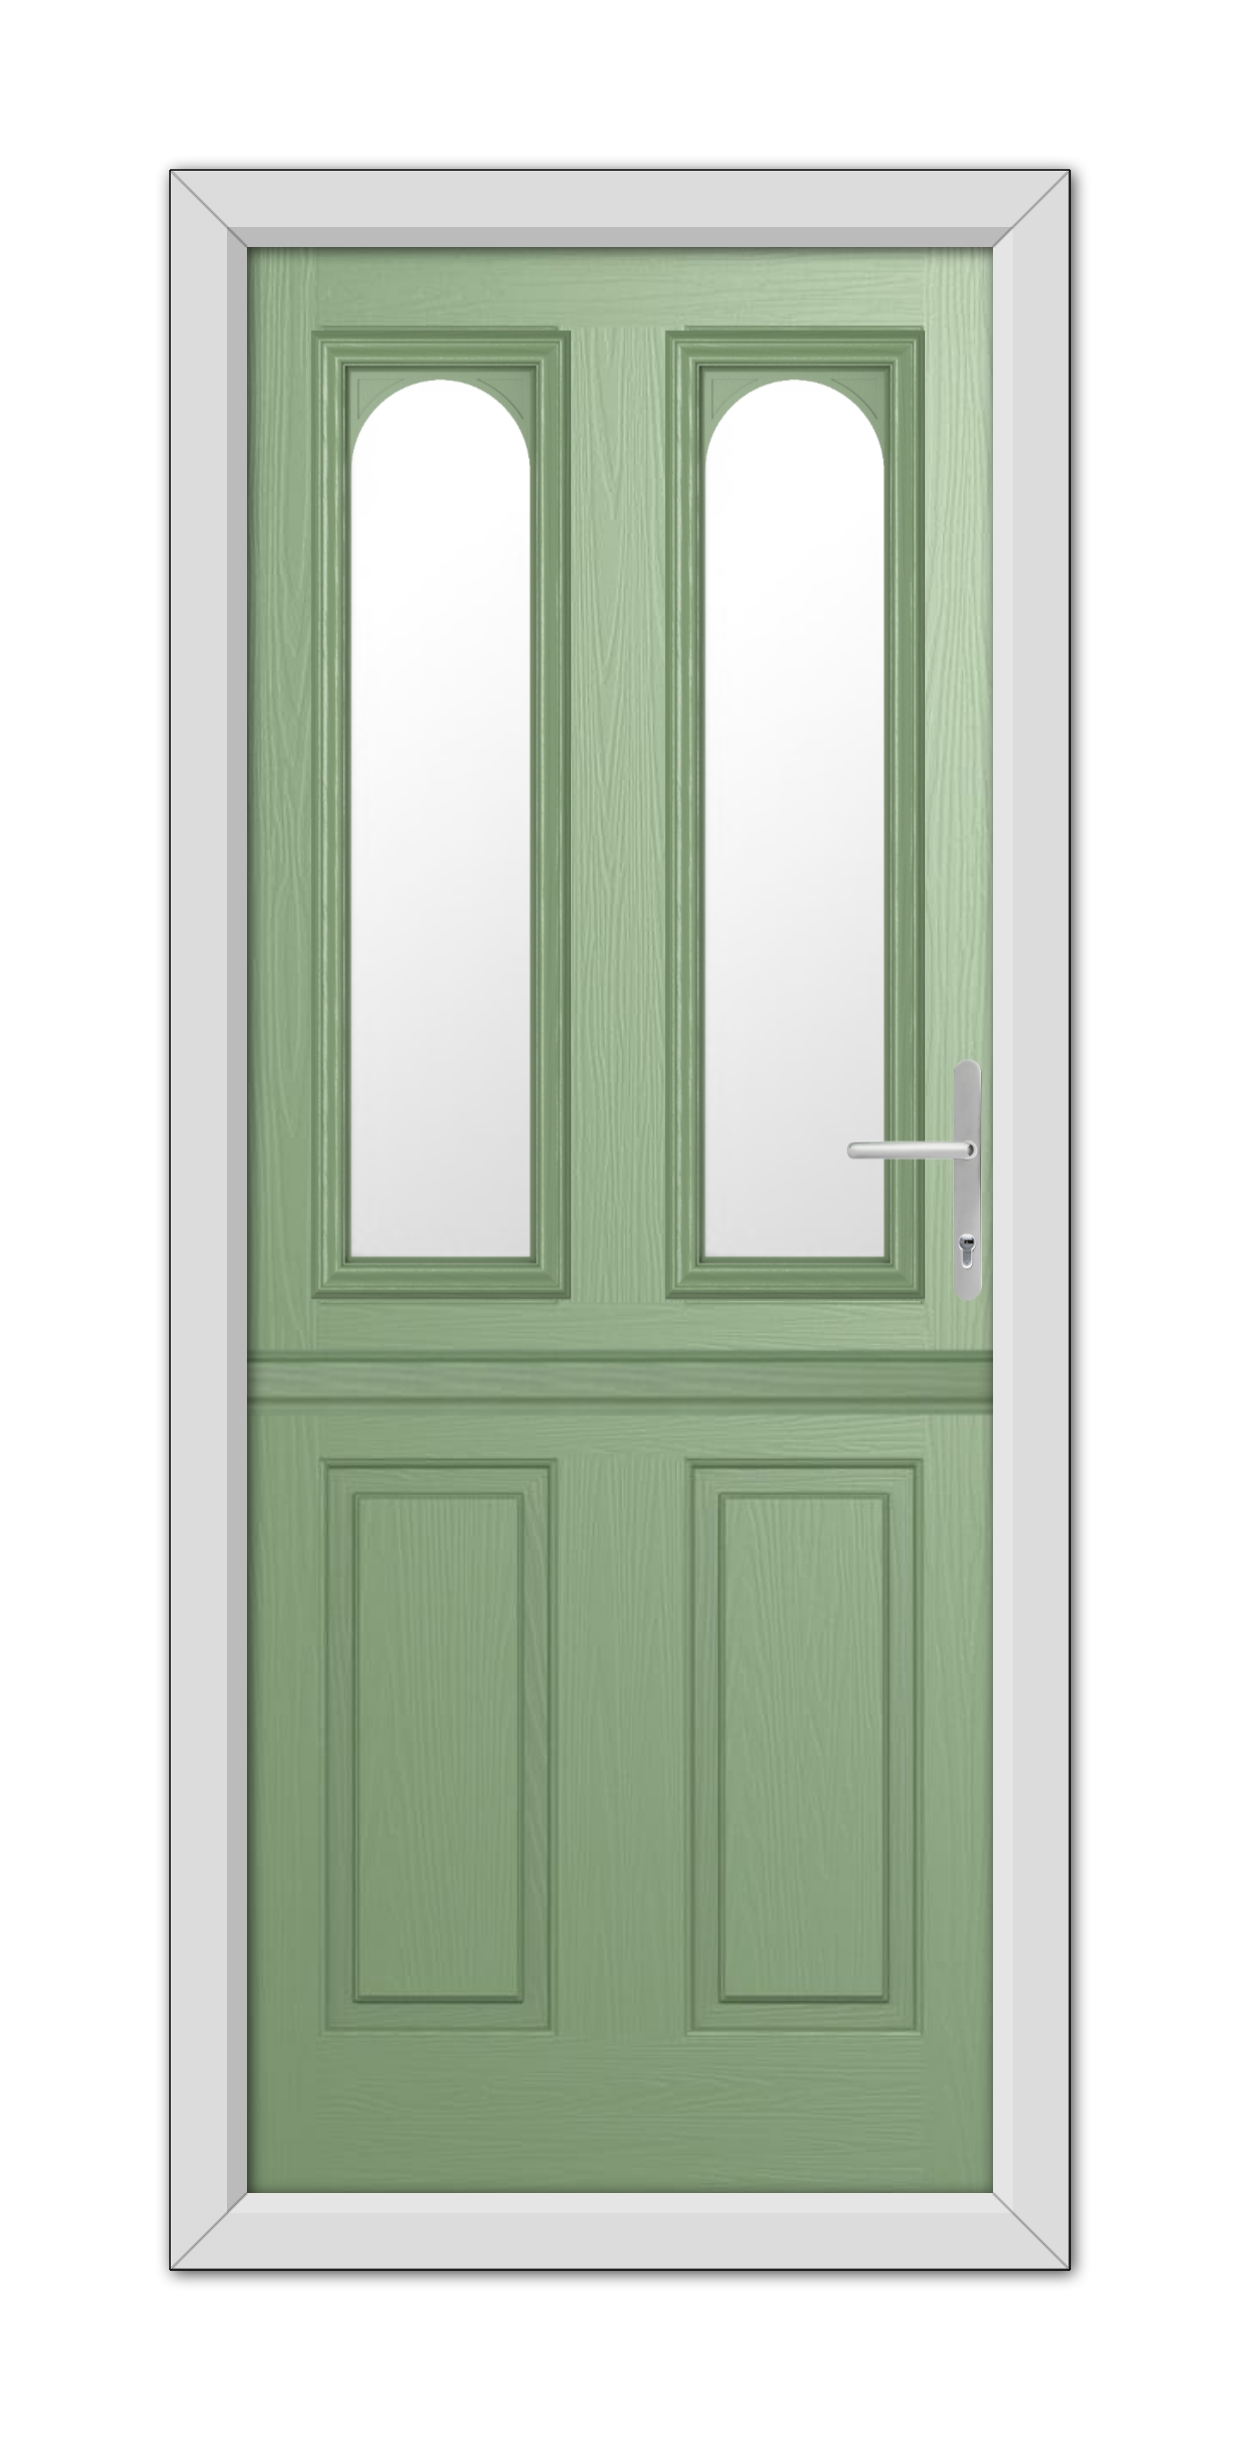 A Chartwell Green Elmhurst Stable Composite Door with rectangular glass windows on the top half and solid panels on the bottom, framed in white.